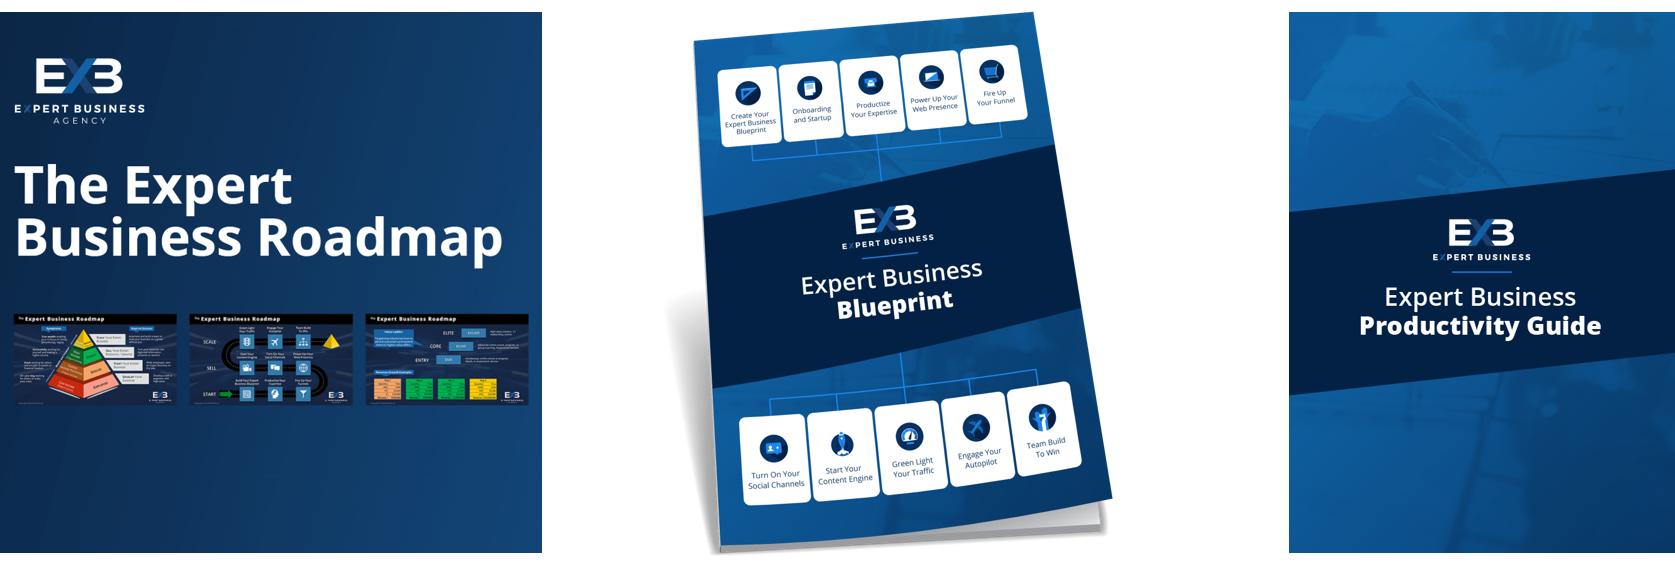 Image of the expert business roadmap, blueprint, and productivity guide